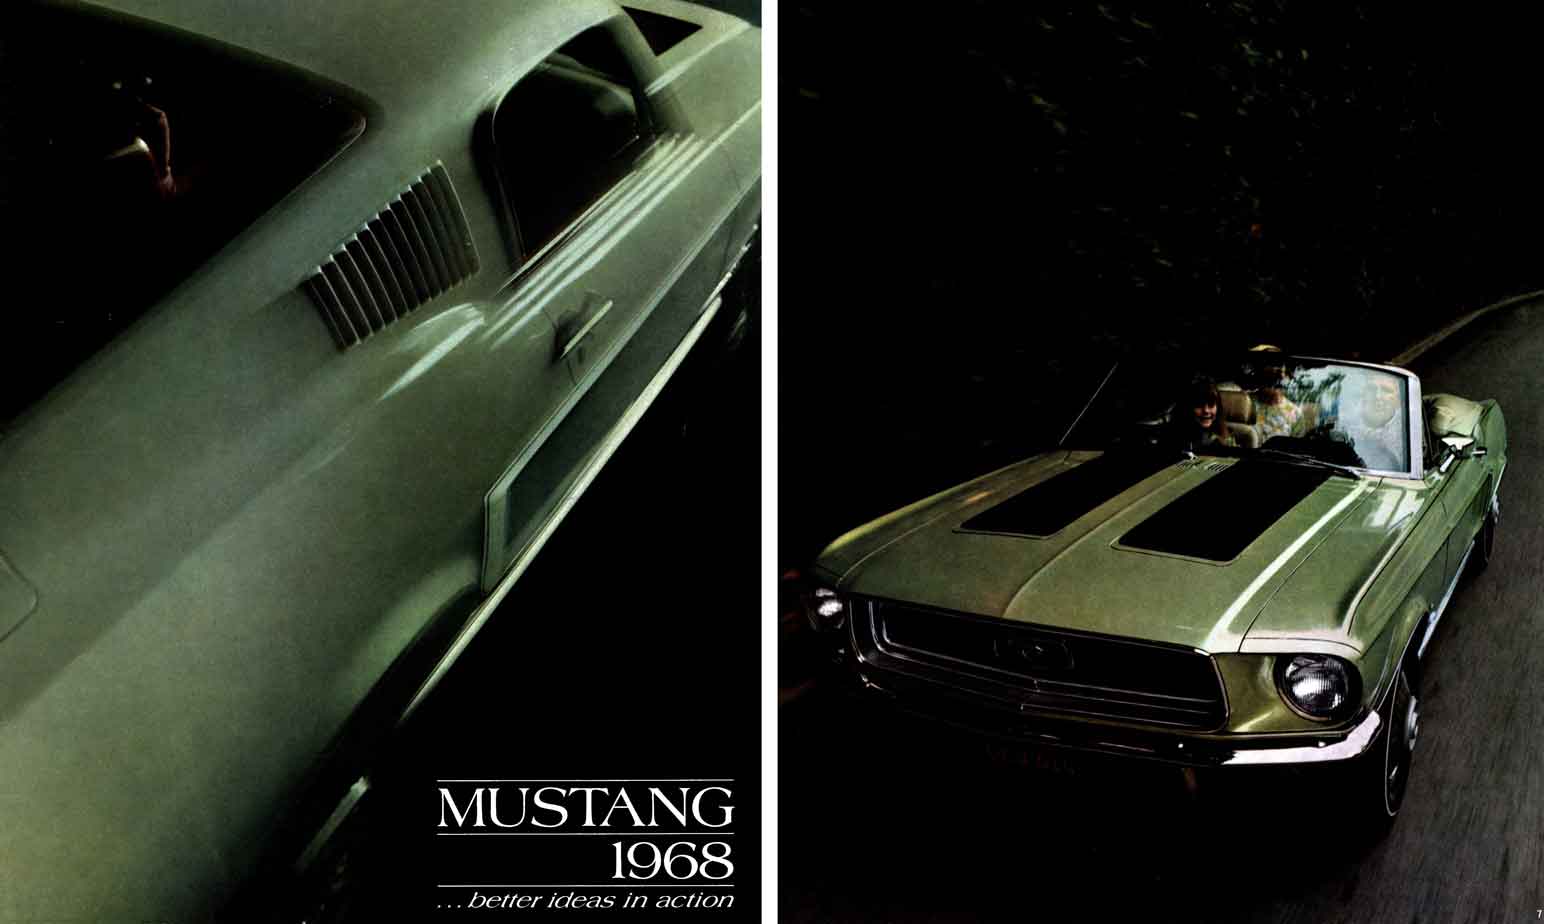 Mustang 1968 Ford - Mustang 1968 - better ideas in action